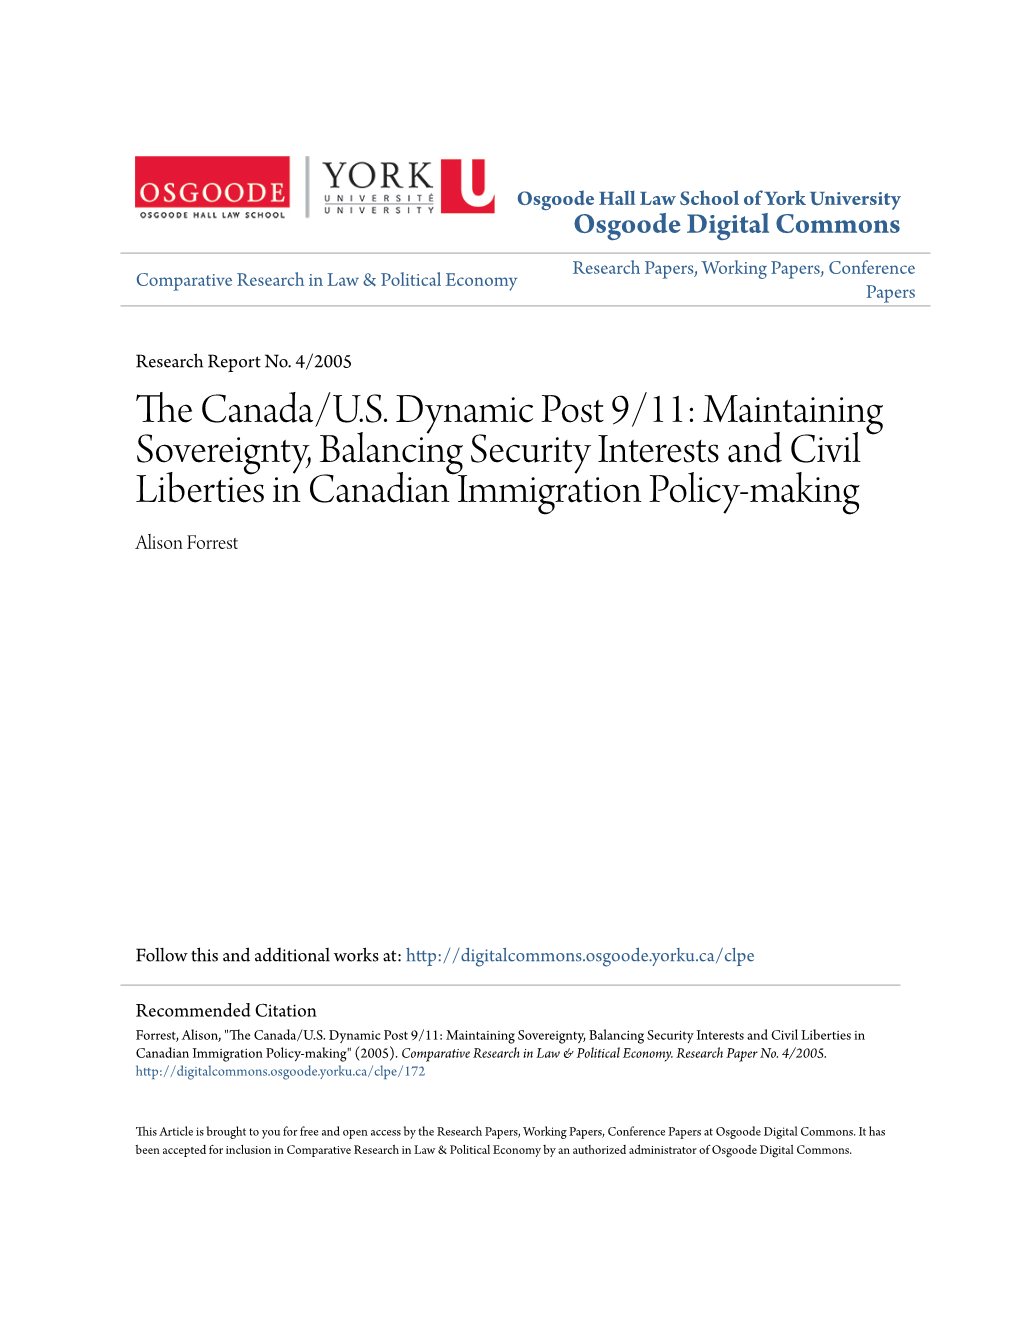 Maintaining Sovereignty, Balancing Security Interests and Civil Liberties in Canadian Immigration Policy-Making Alison Forrest